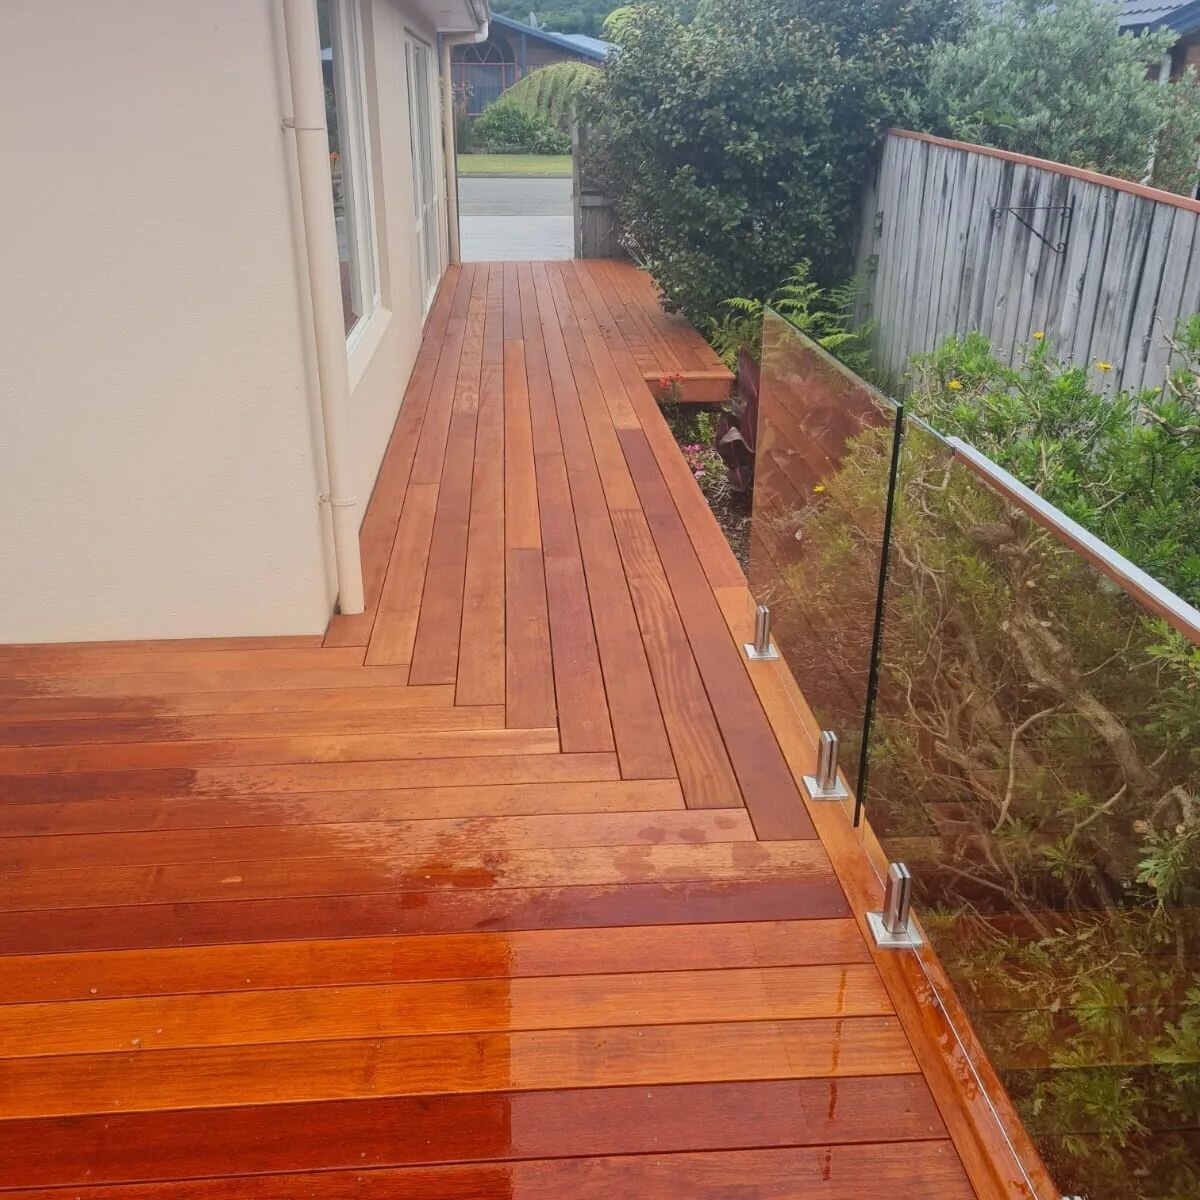 This deck is ready for the summer with its dining area, Herringbone corner, glass balustrade, and steps leading to the garden 😍 a great job done Mike

#decks4u #freequotes #passionateaboutdecks #spax #kwiladecking #newbuild #new #reno #upgrade